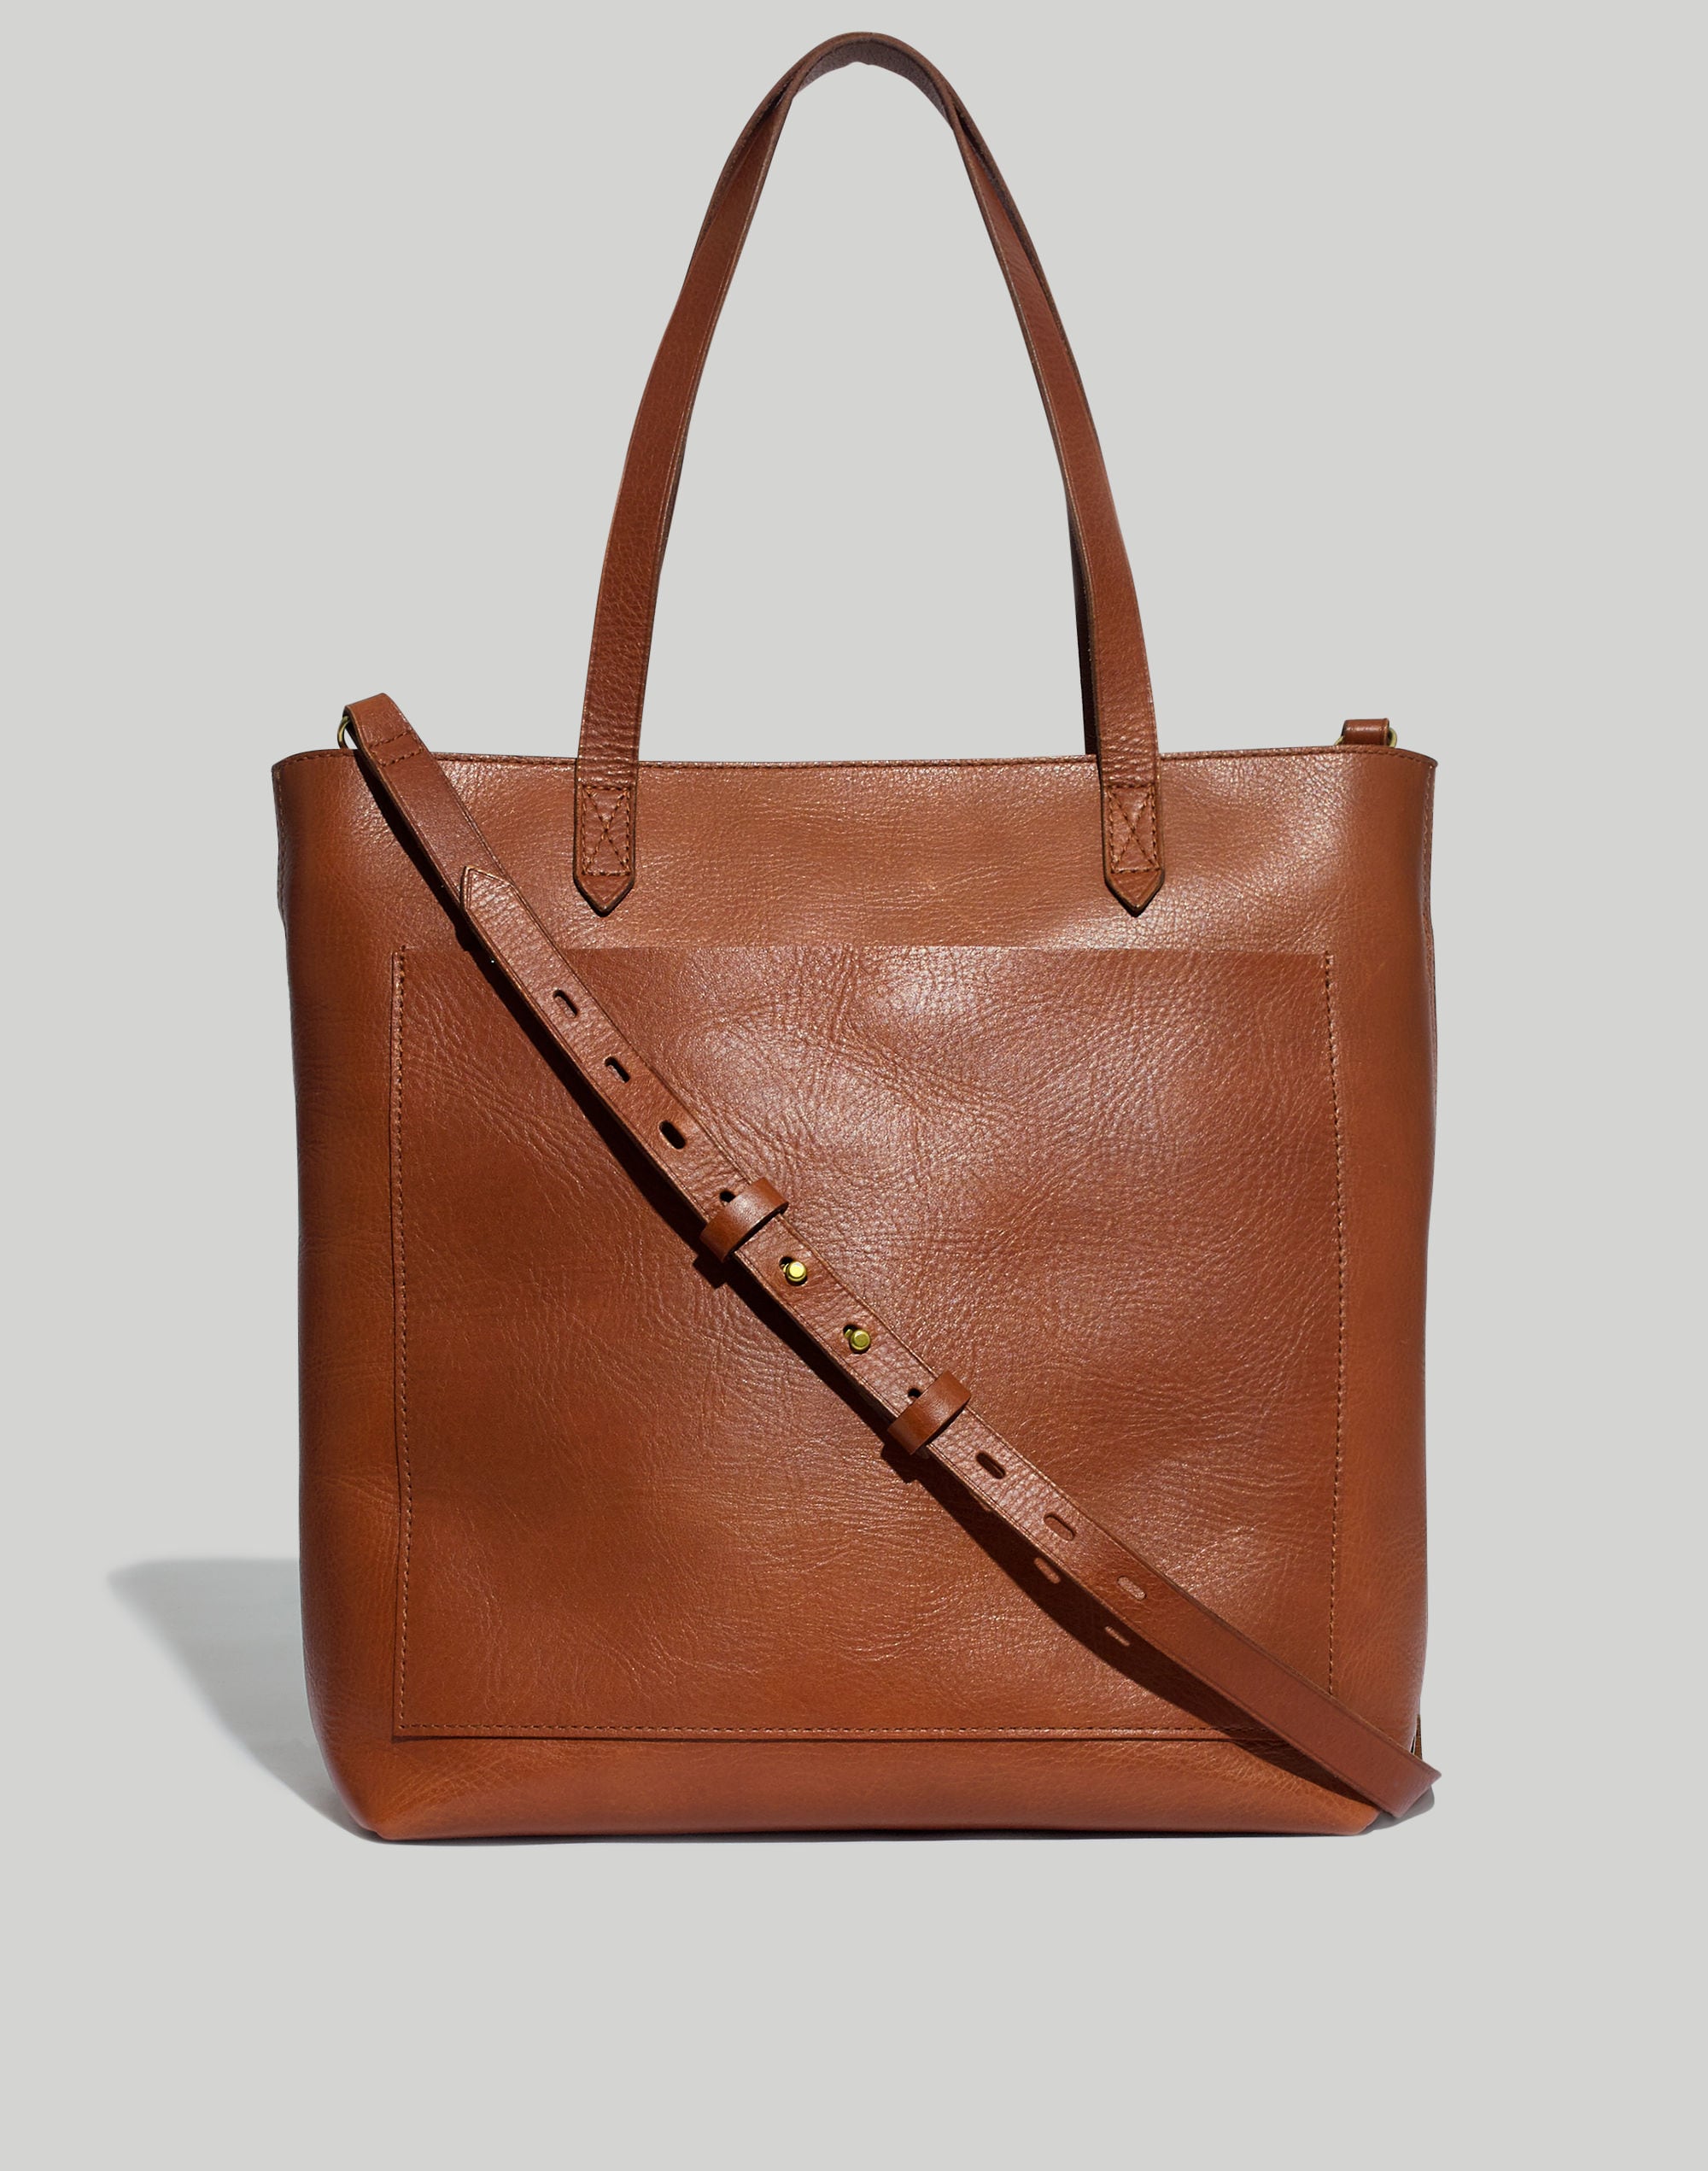 Fossil Cactus Leather Totes Latest Vegan Bags to Hit the Market